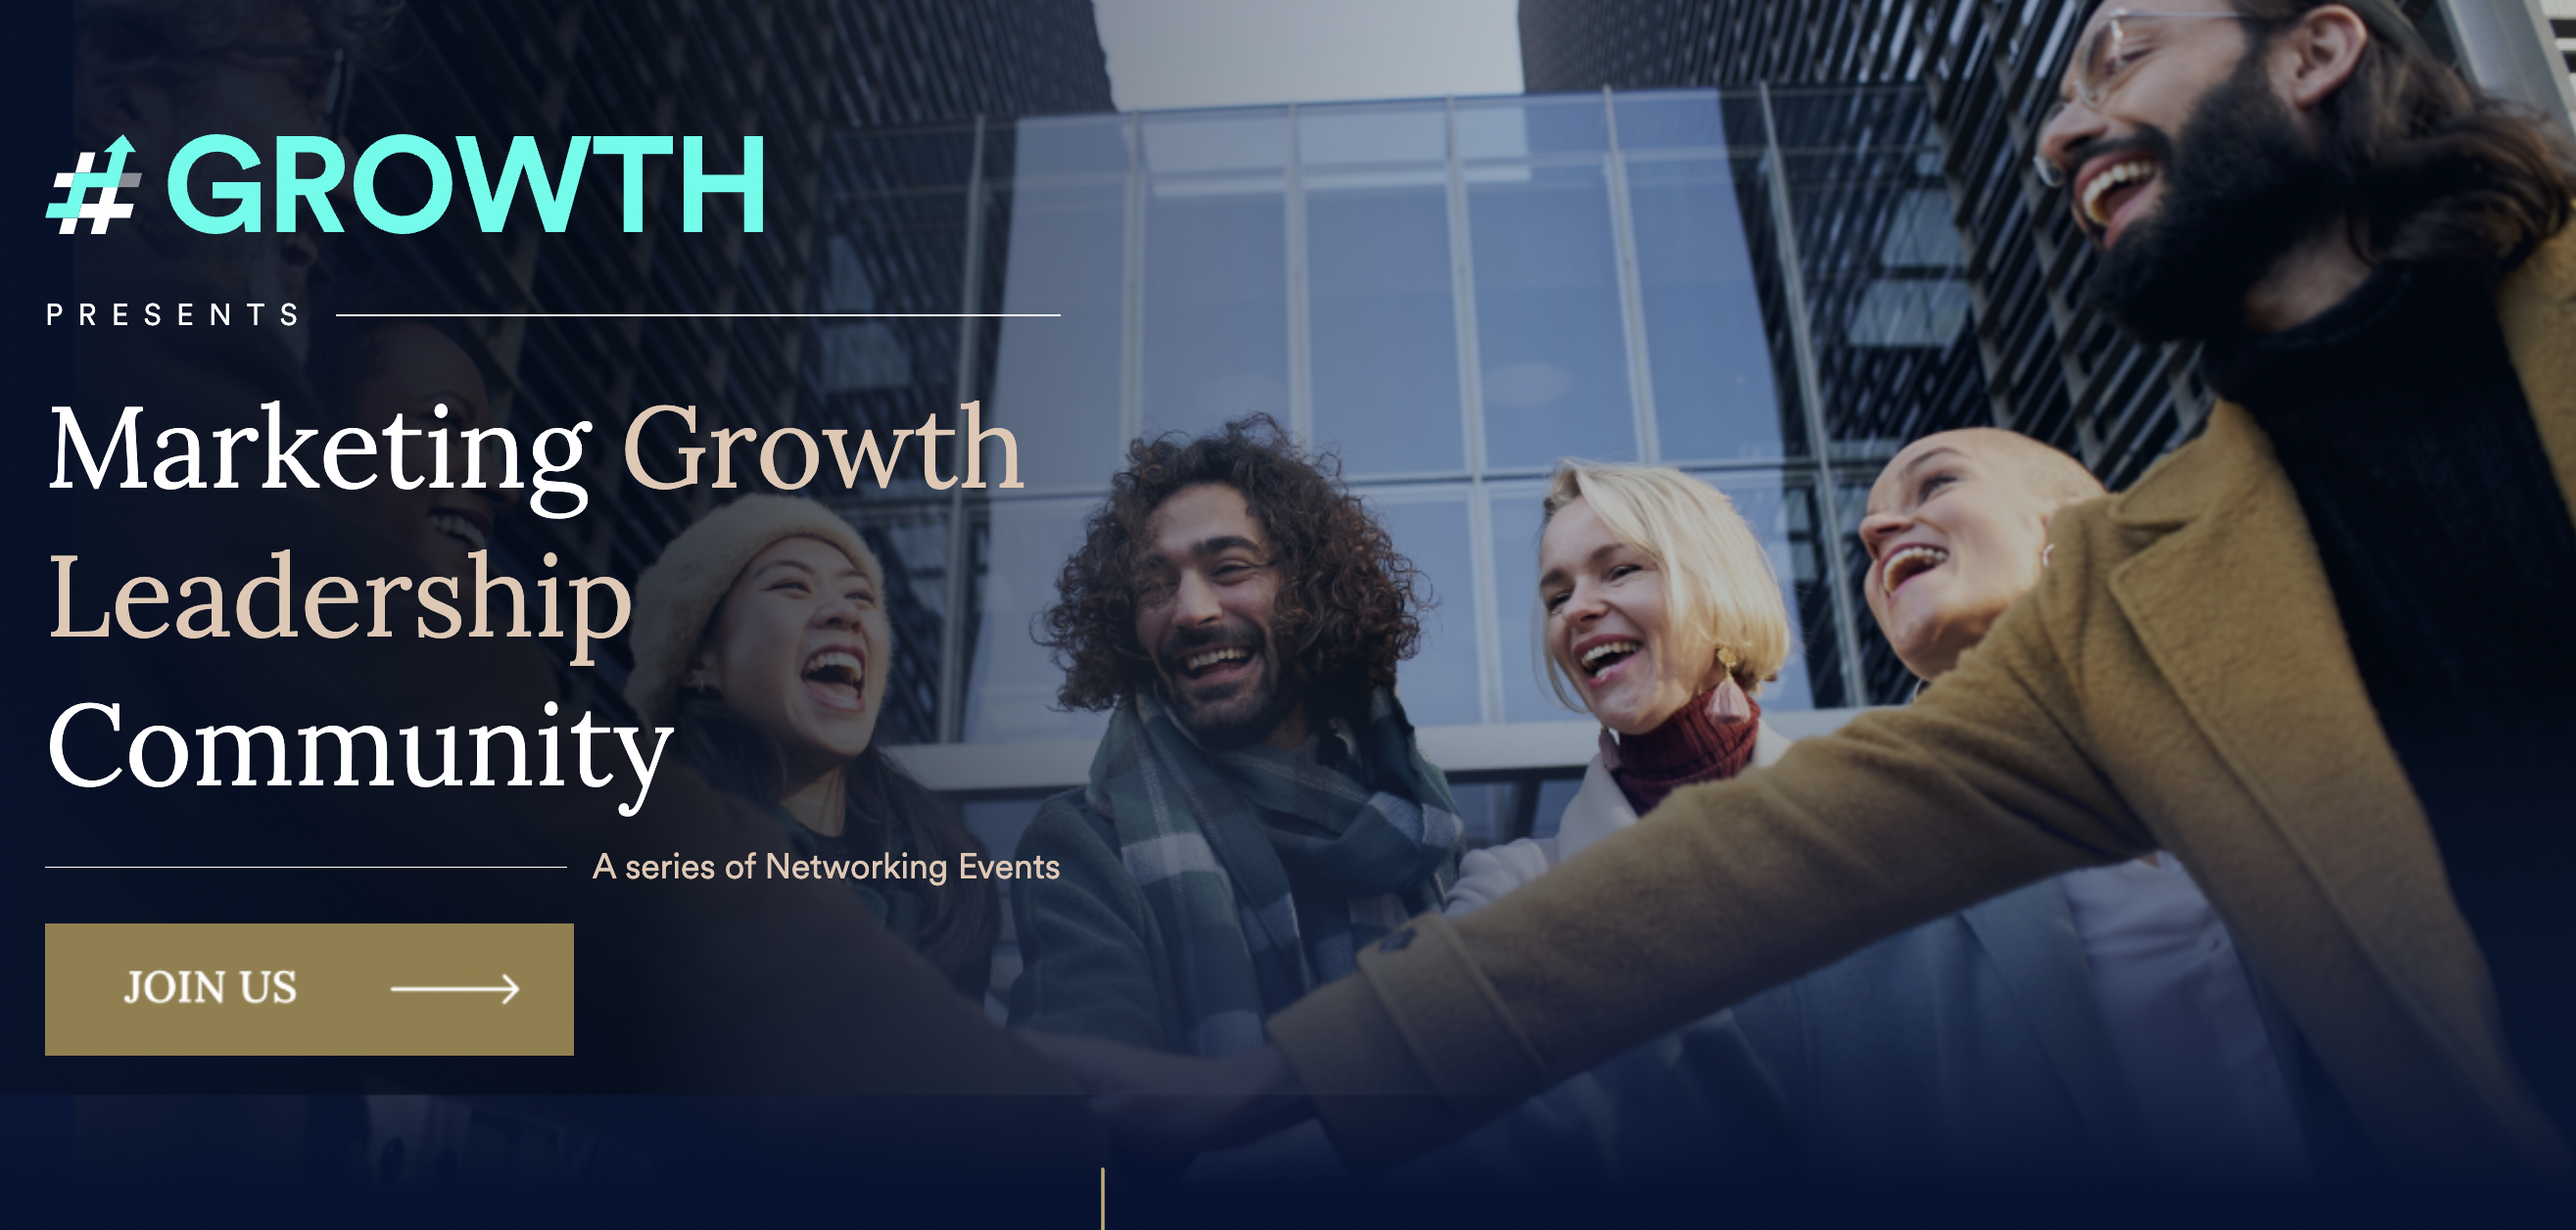 #GROWTH Event Series United States